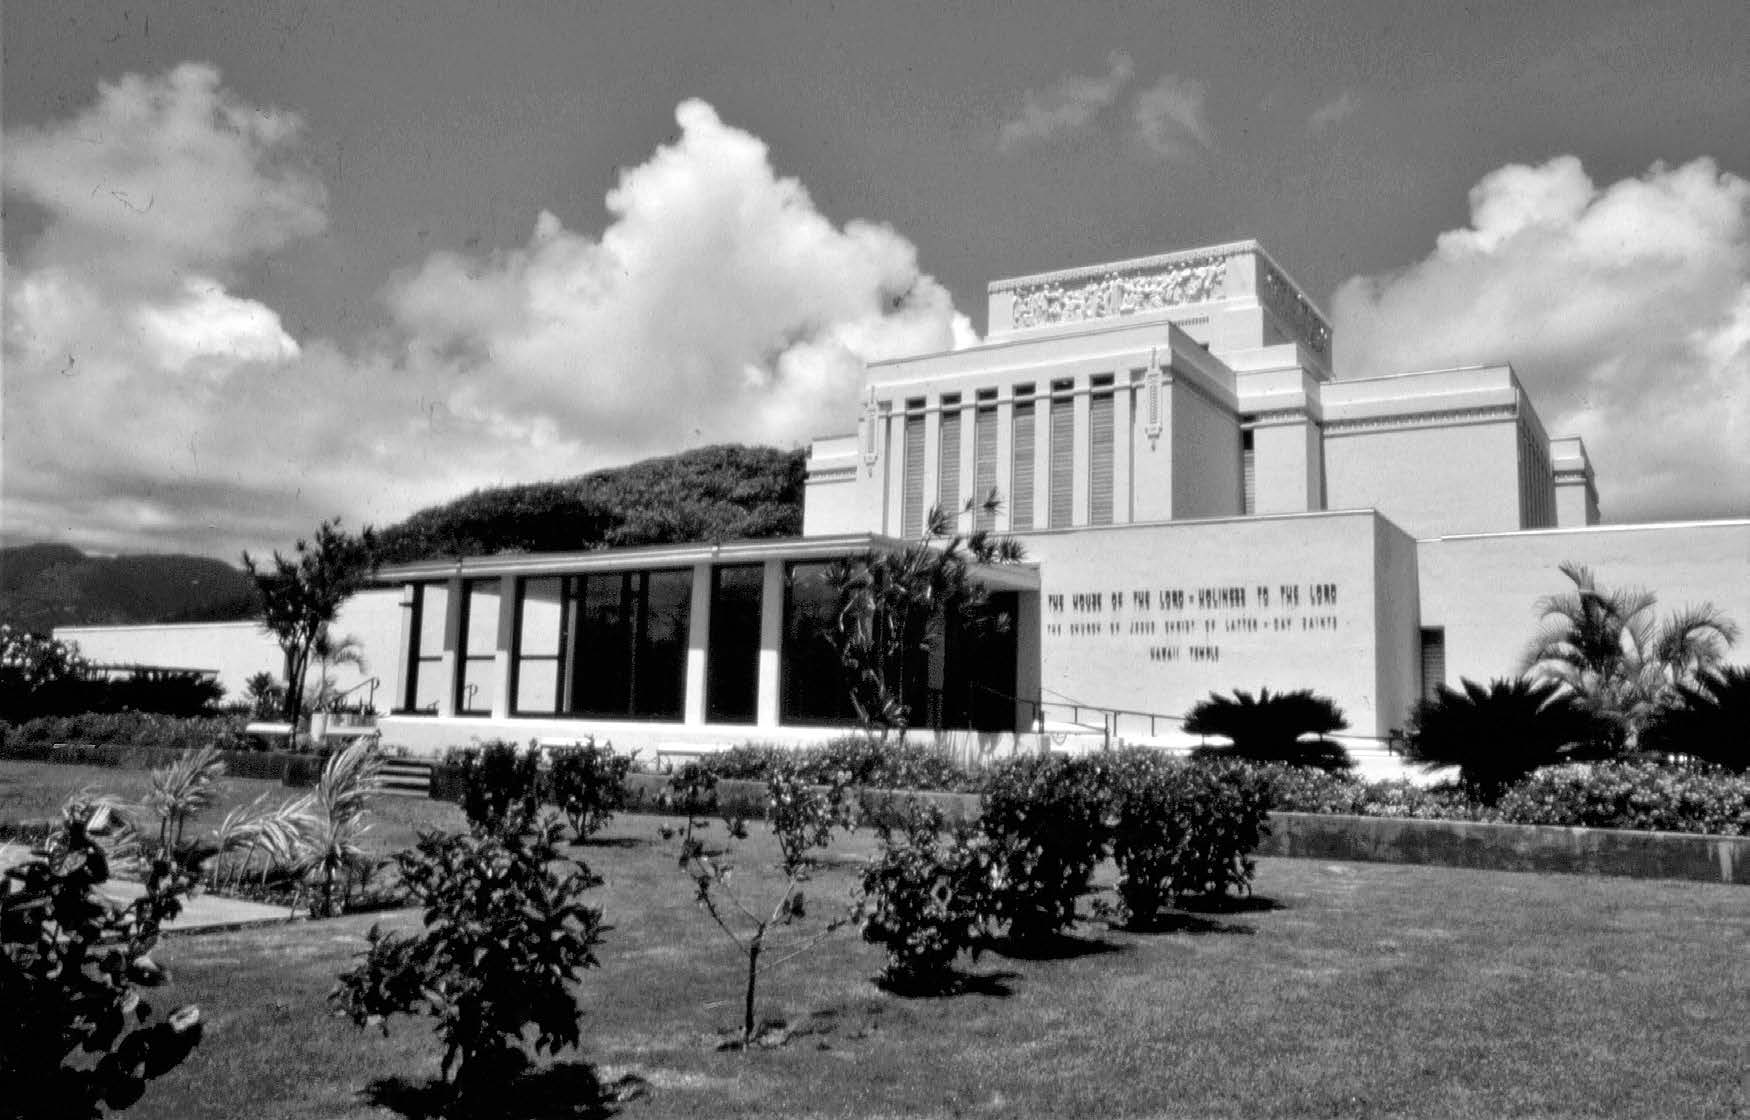 The most noticeable addition was the extension of the main temple entrance about twelve feet forward, doubling the size of the reception area. Courtesy of BYU–Hawaii Archives.